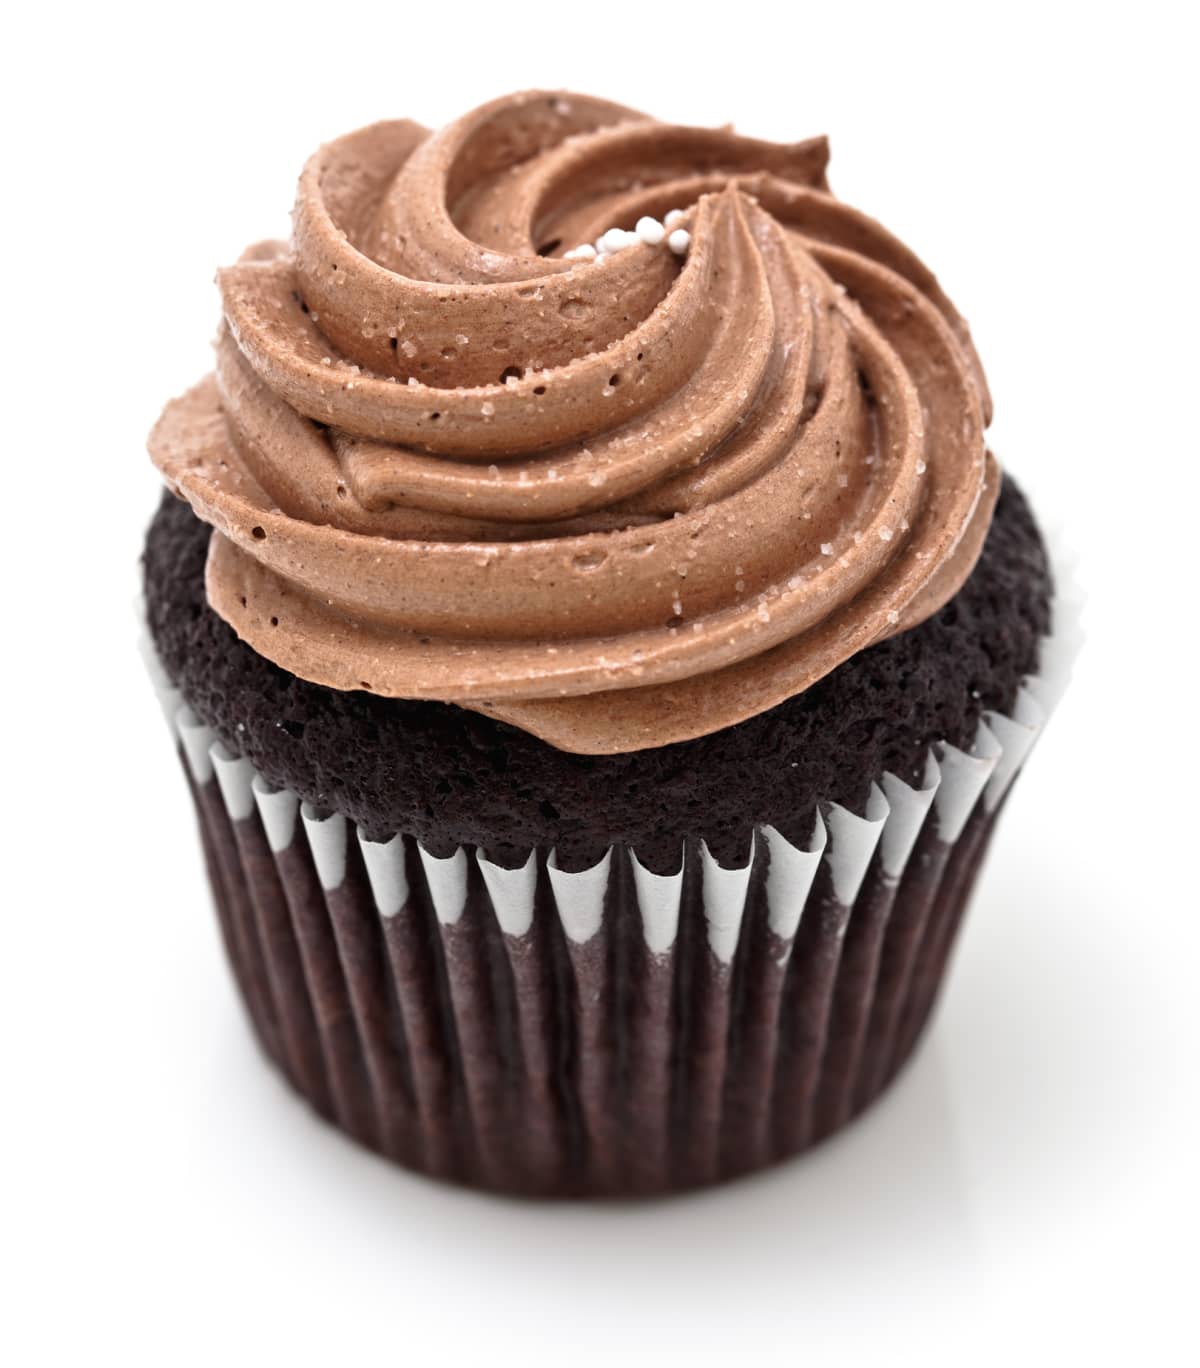 A chocolate cupcake with chocolate buttercream frosting